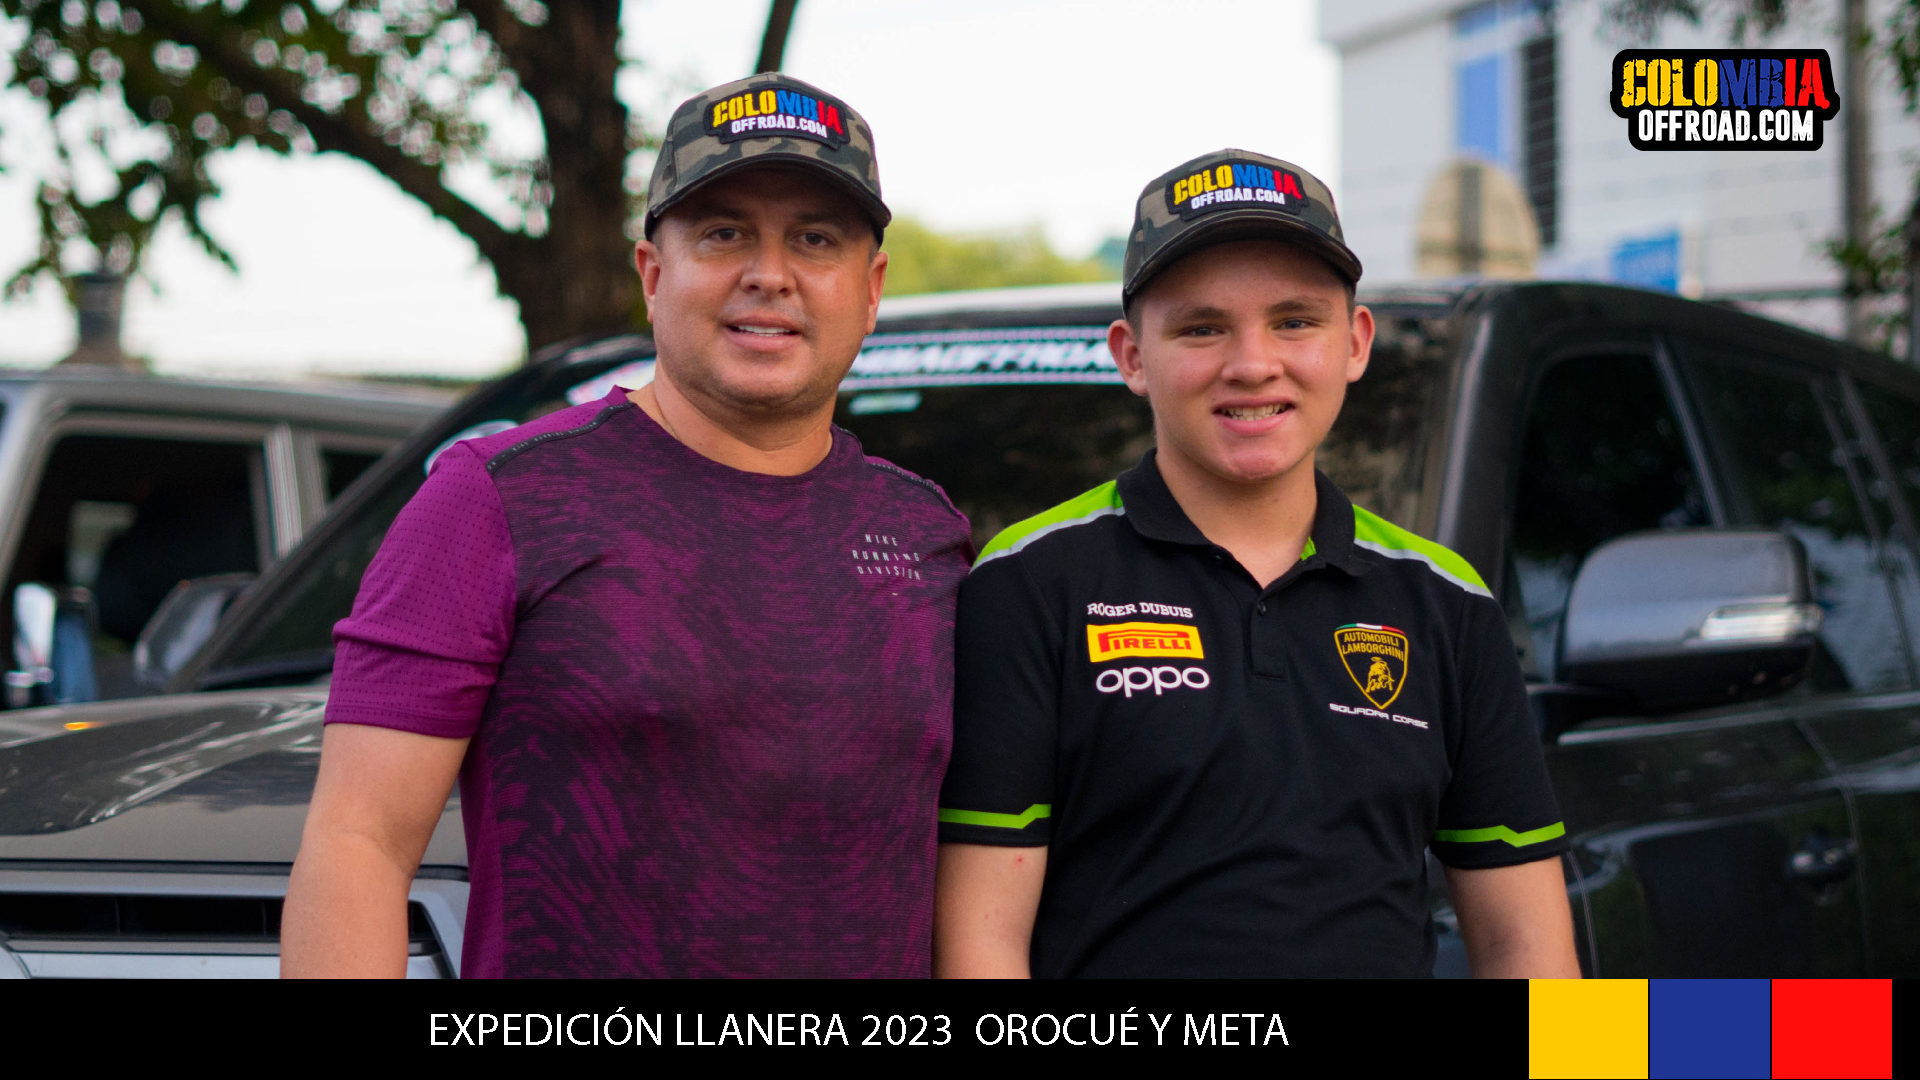 COLOMBIA OFF ROAD (9)